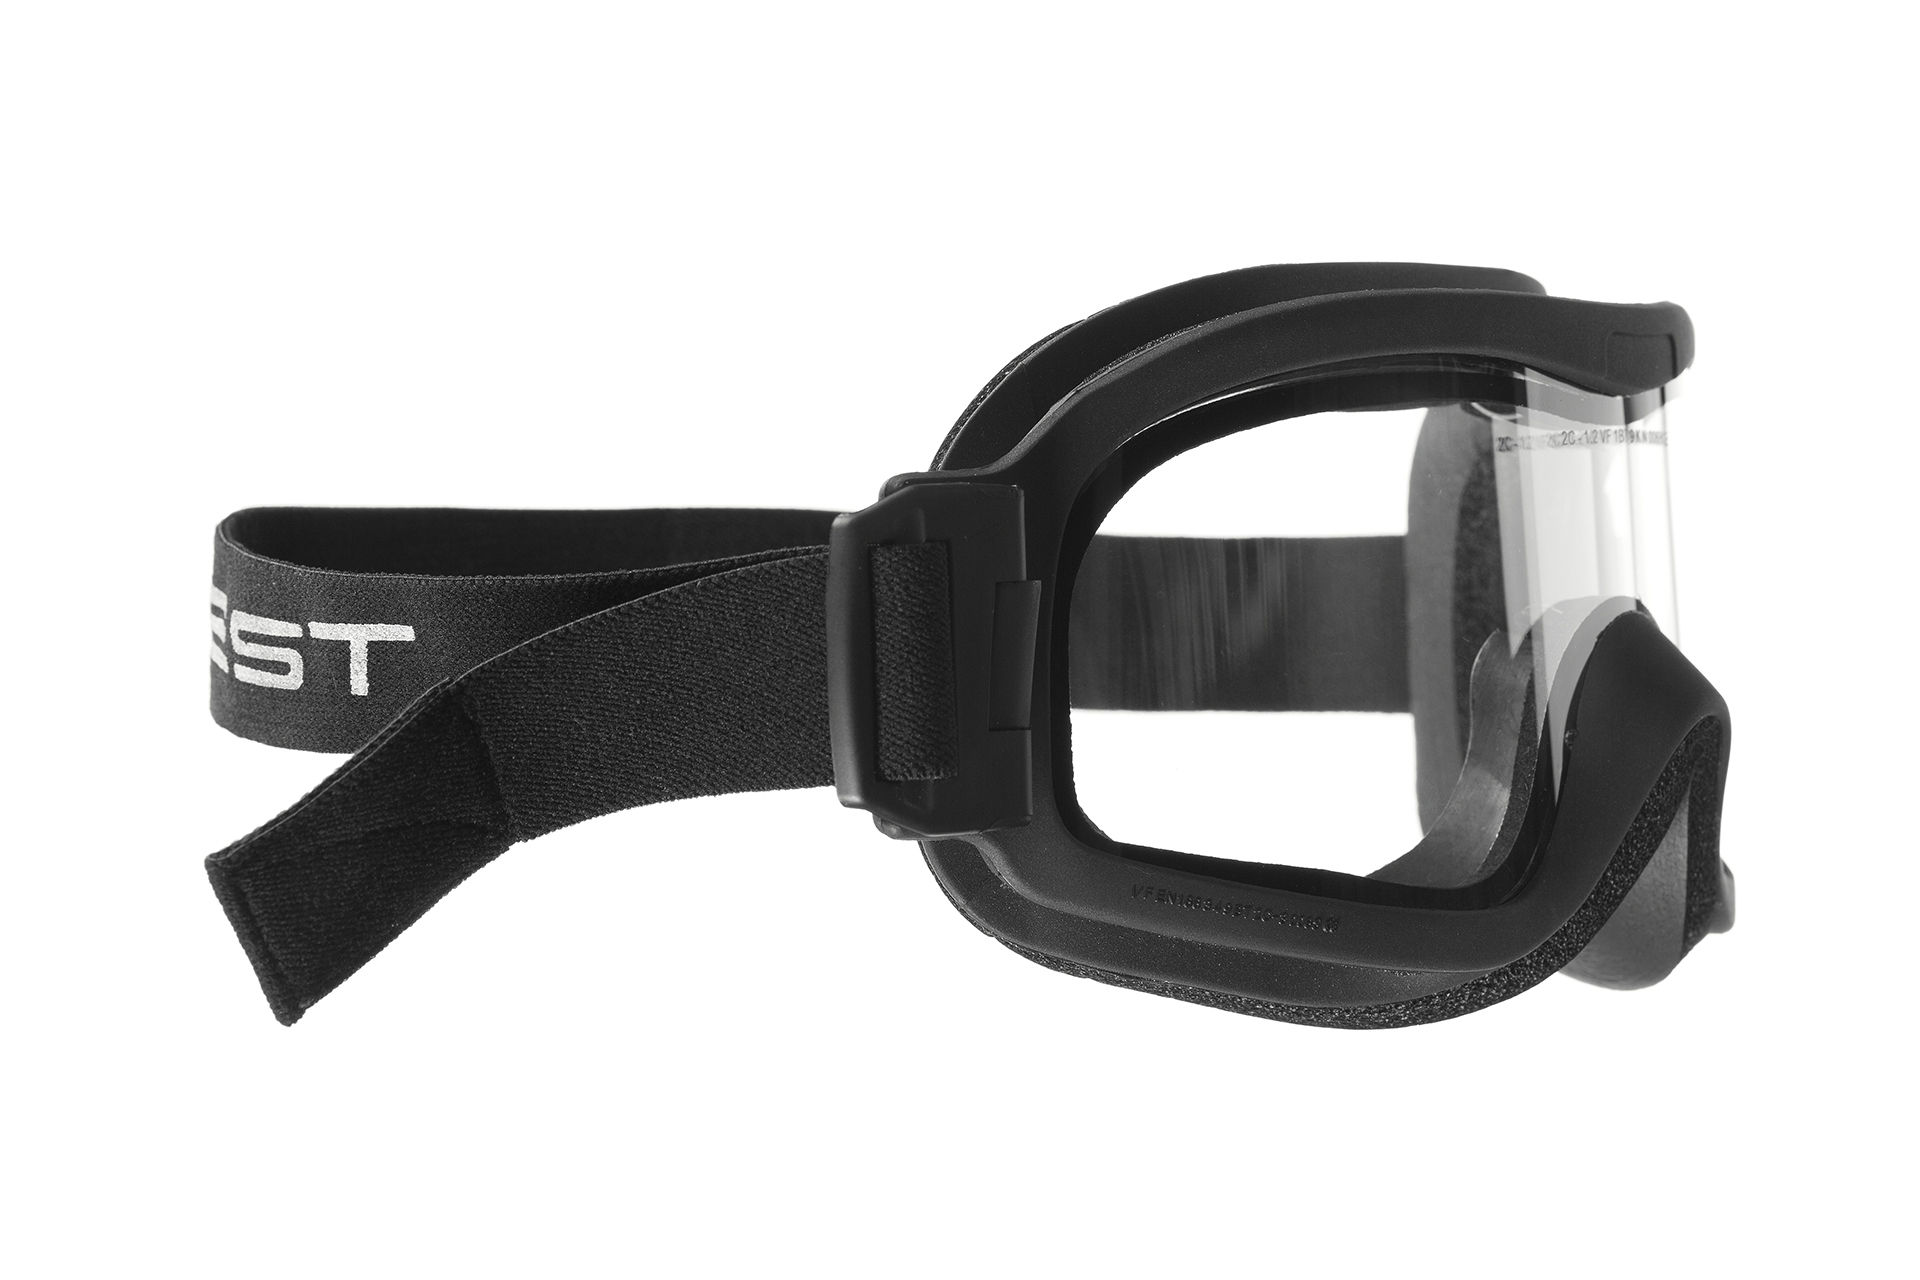 Sealed vft1 Firefighter goggles 3